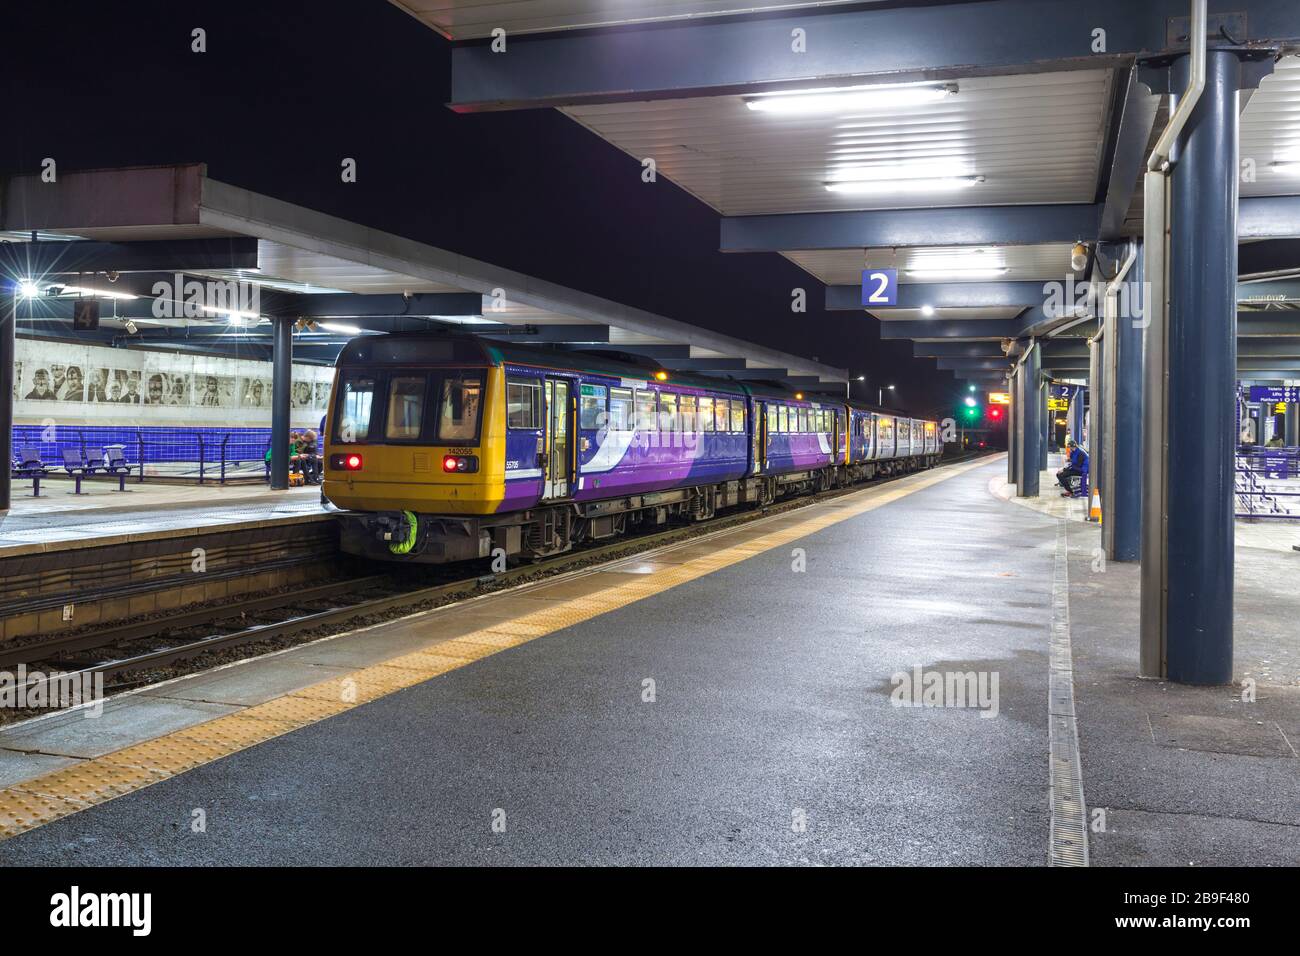 Northern Rail class 142 pacer train 142055 at Blackburn railway station on the rear of a Clitheroe to Rochdale train Stock Photo